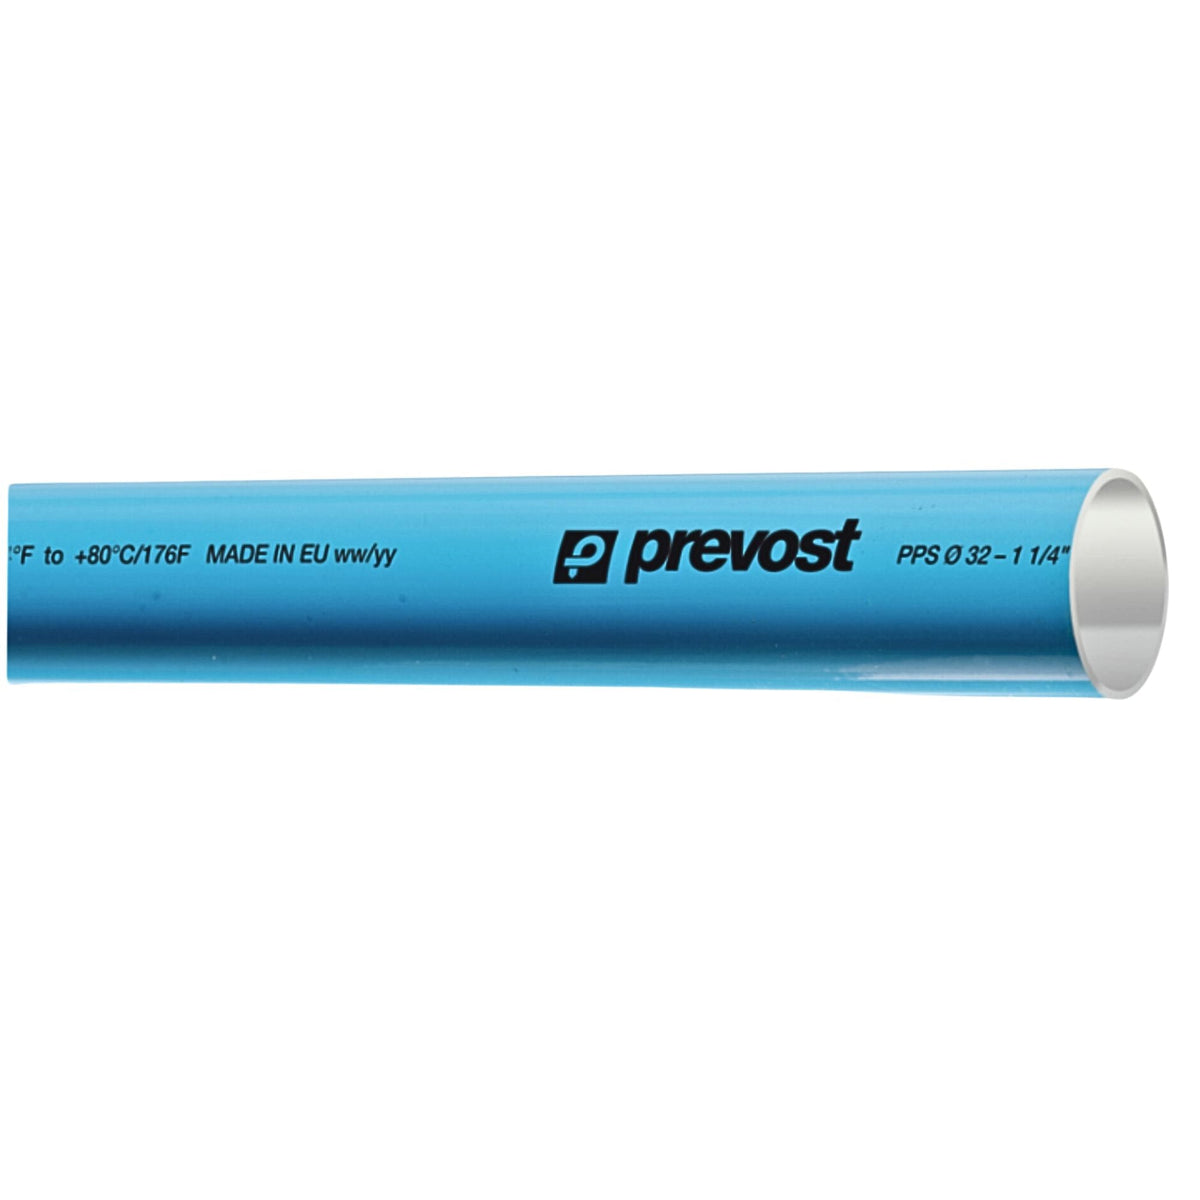 PPS - Aluminum 1/2&quot; blue pipe for compressed air used on prevos1 product line